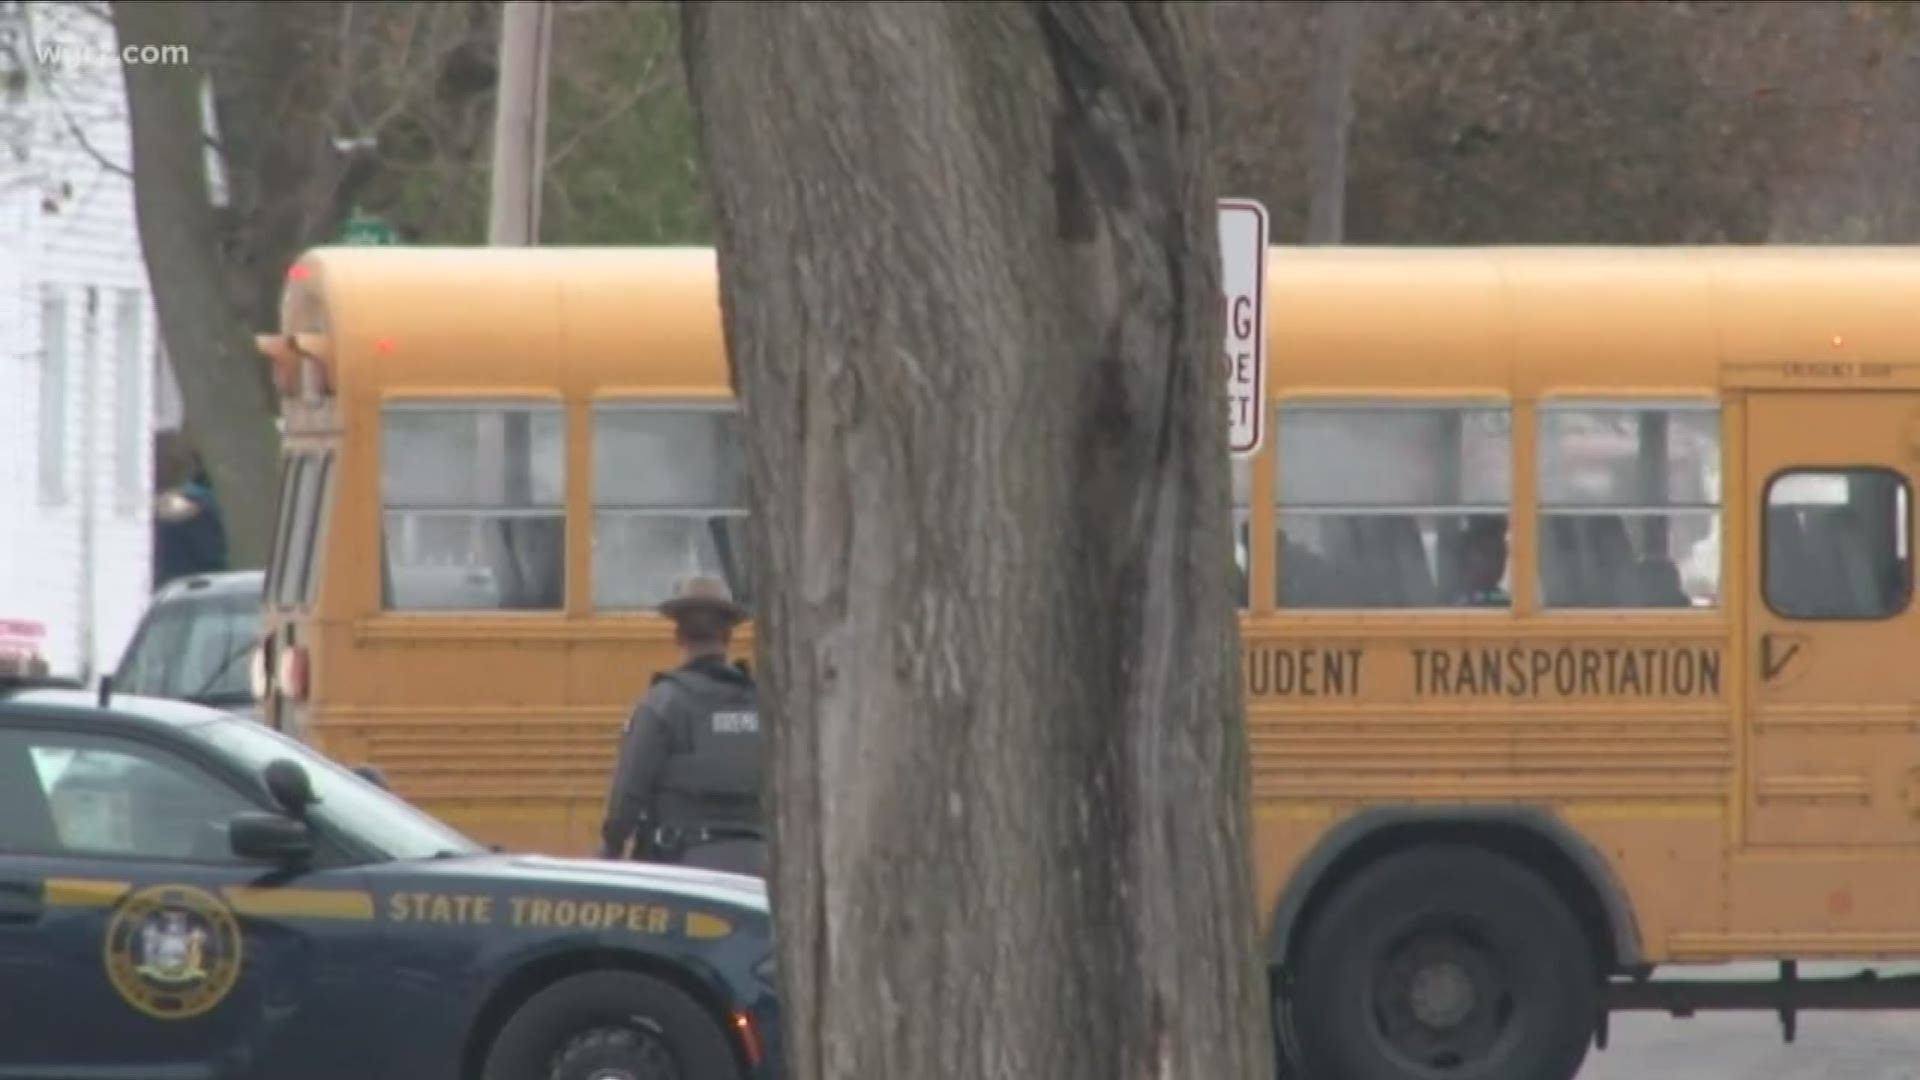 STUDENTS AT JACKSON PRIMARY SCHOOL WERE PLACED INTO LOCKDOWN YESTERDAY-- BUT CLASSES DID RESUME THIS MORNING AS NORMAL.